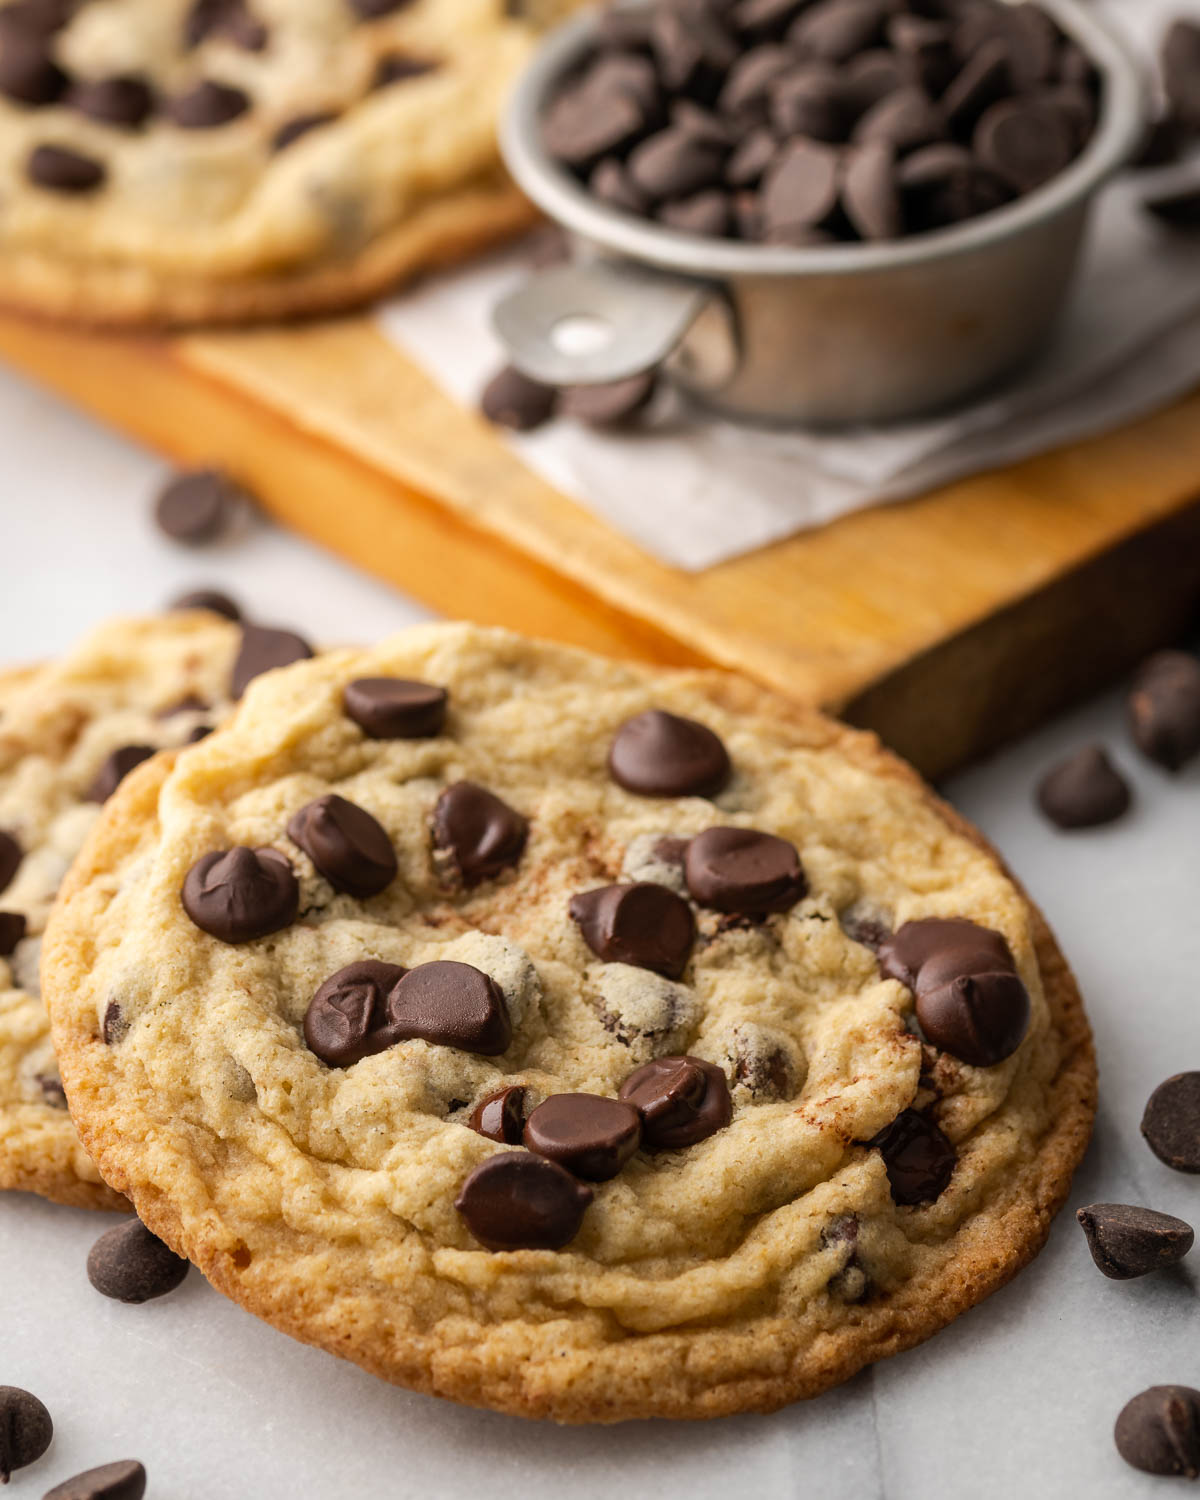 A closeup of a chocolate chip cookie loaded with chocolate chips and wrinkly texture.